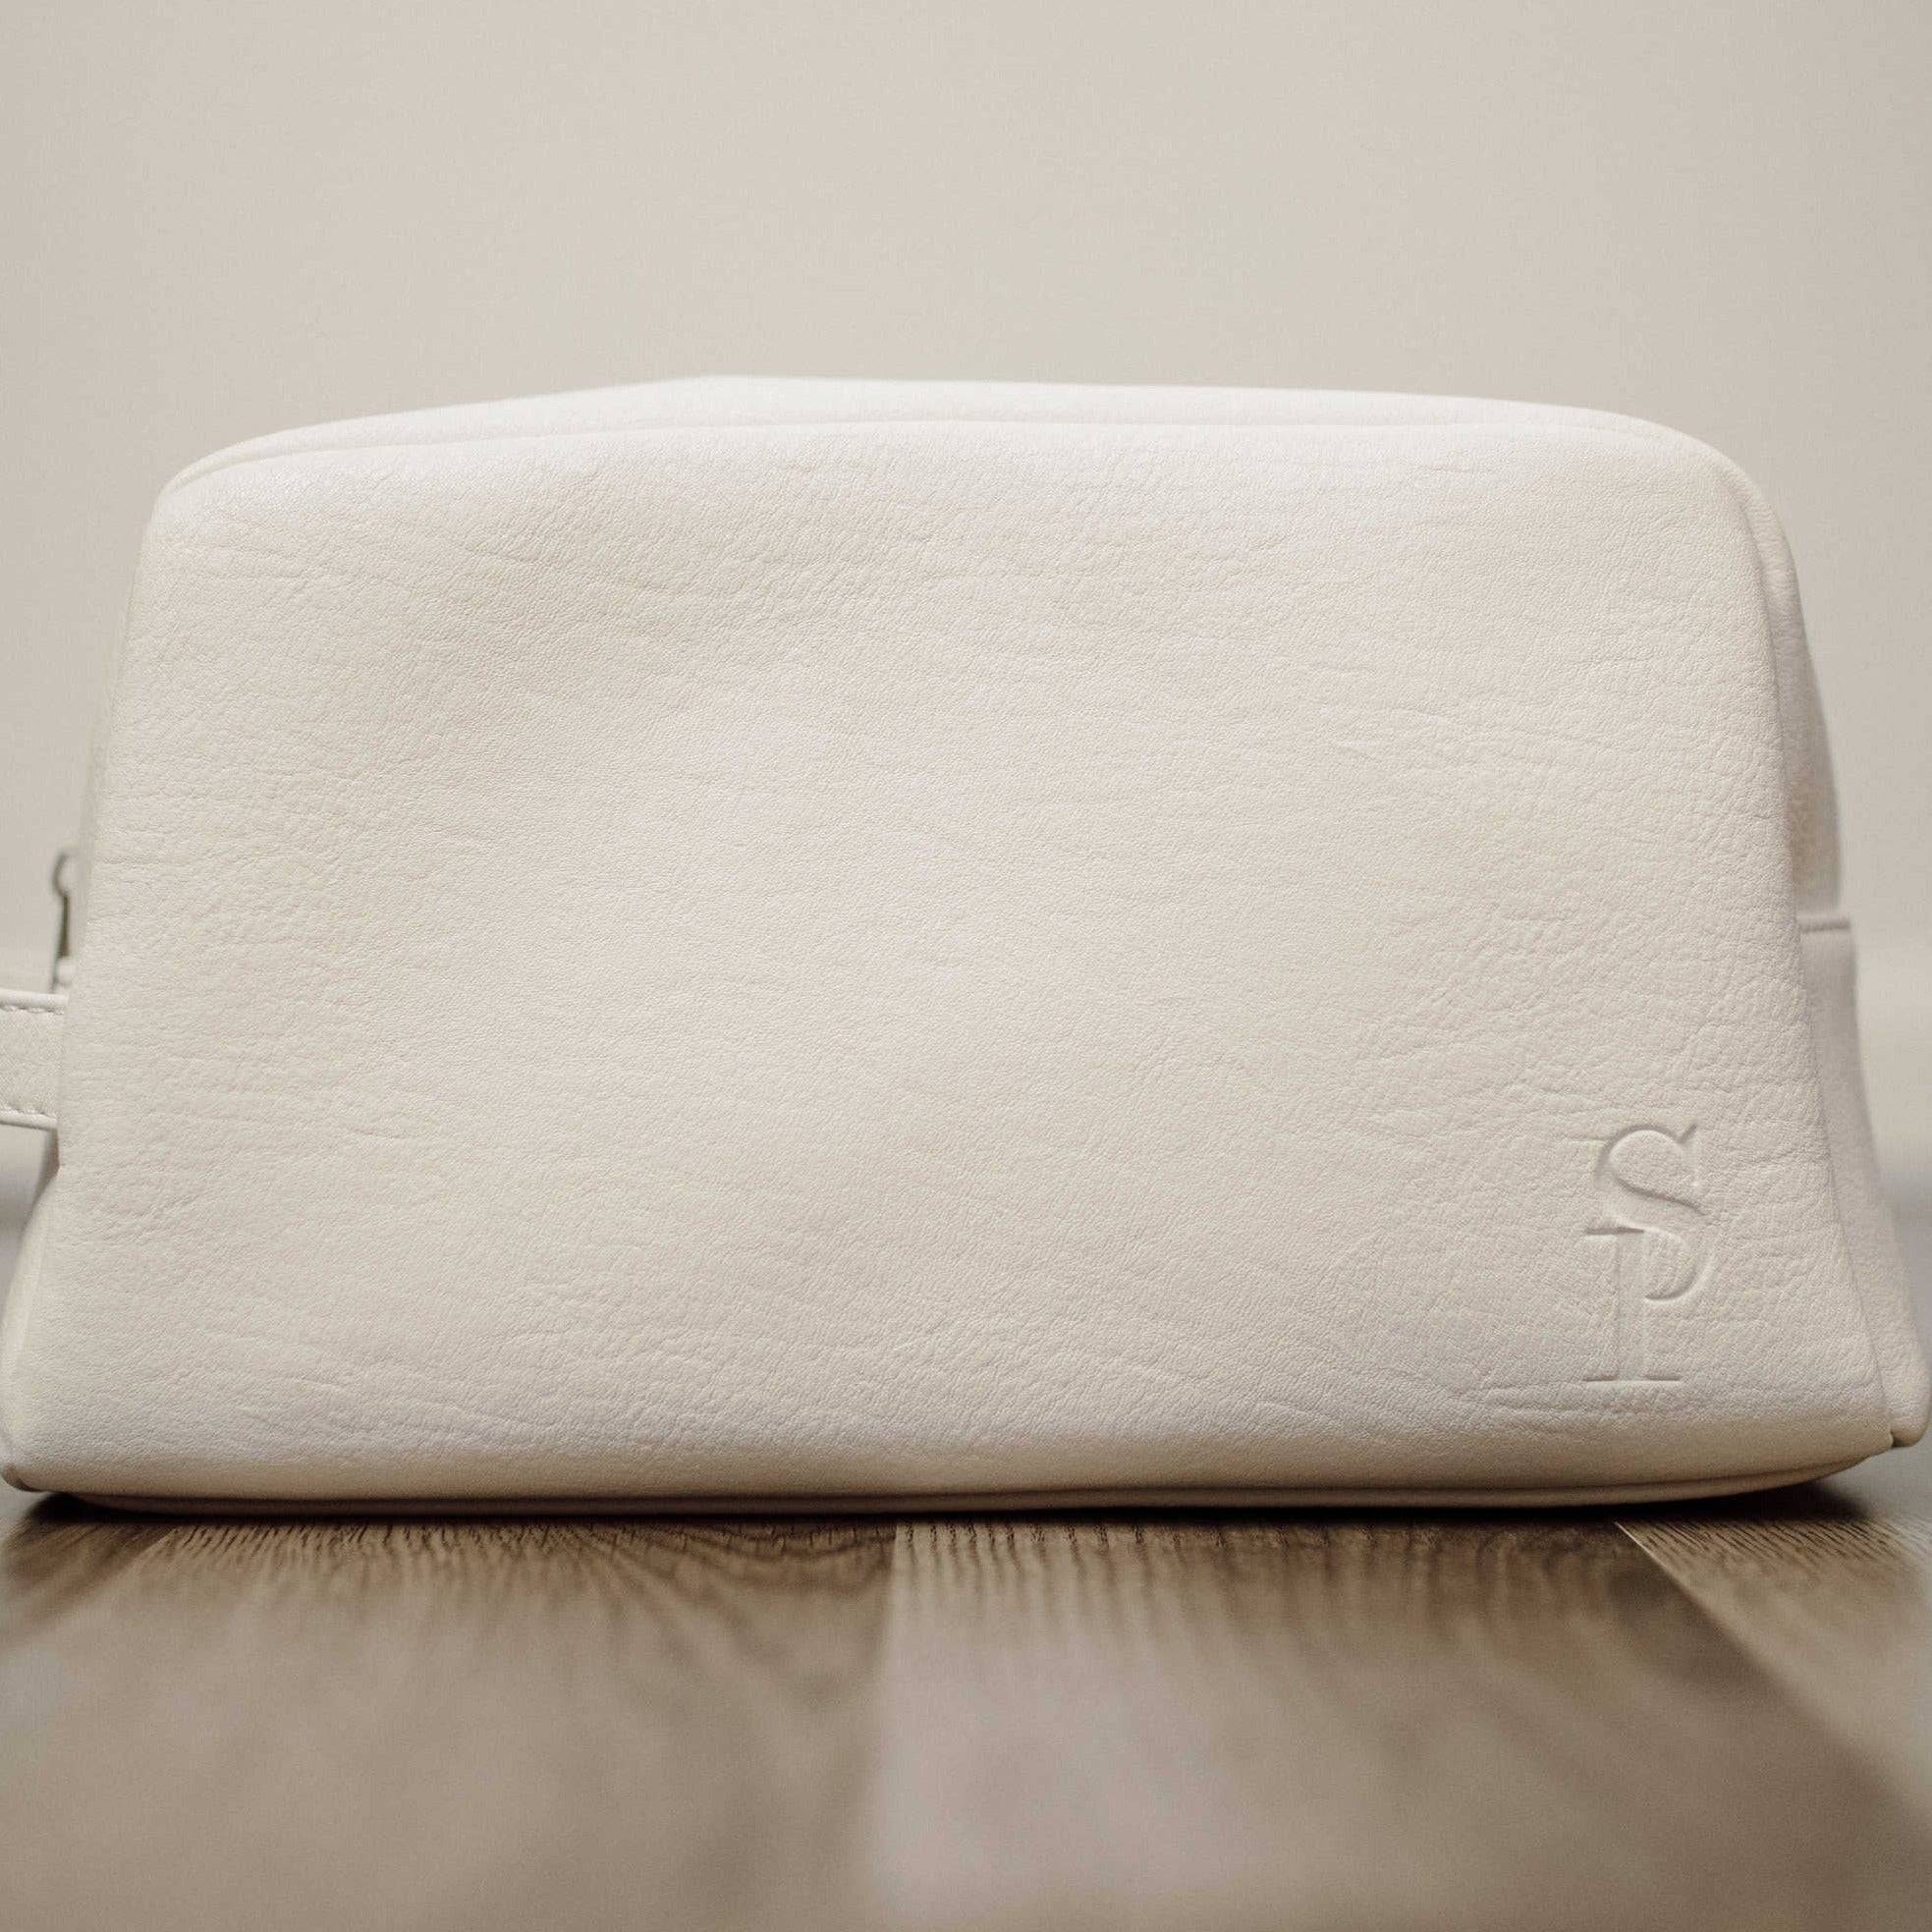 White Leather Toiletry Bag - Sole Premise